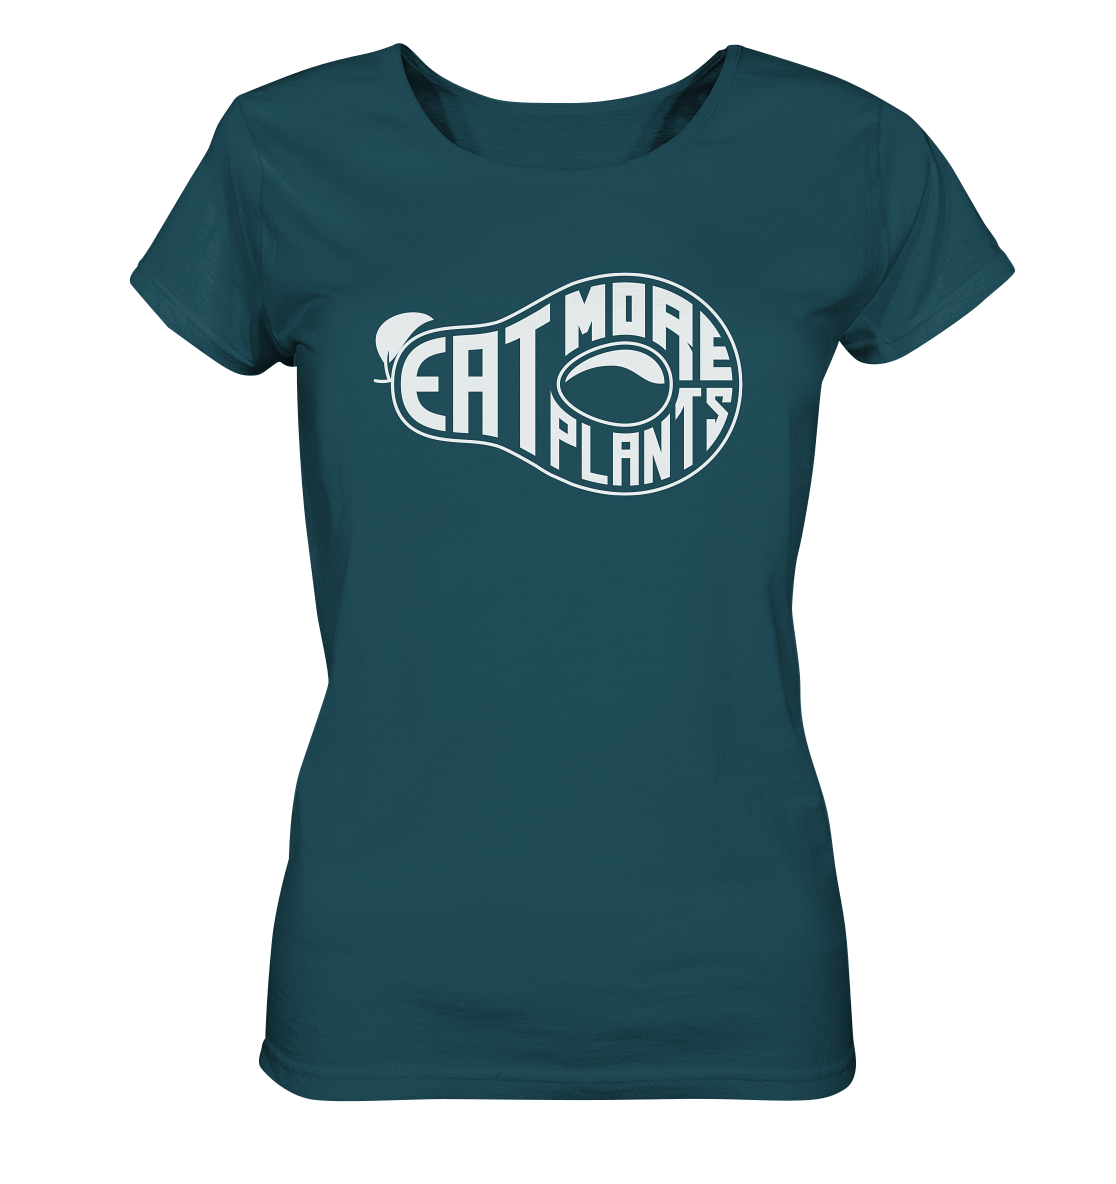 Organic ladies fitted scoop neck t-shirt in  deep teal saying Eat More Plants